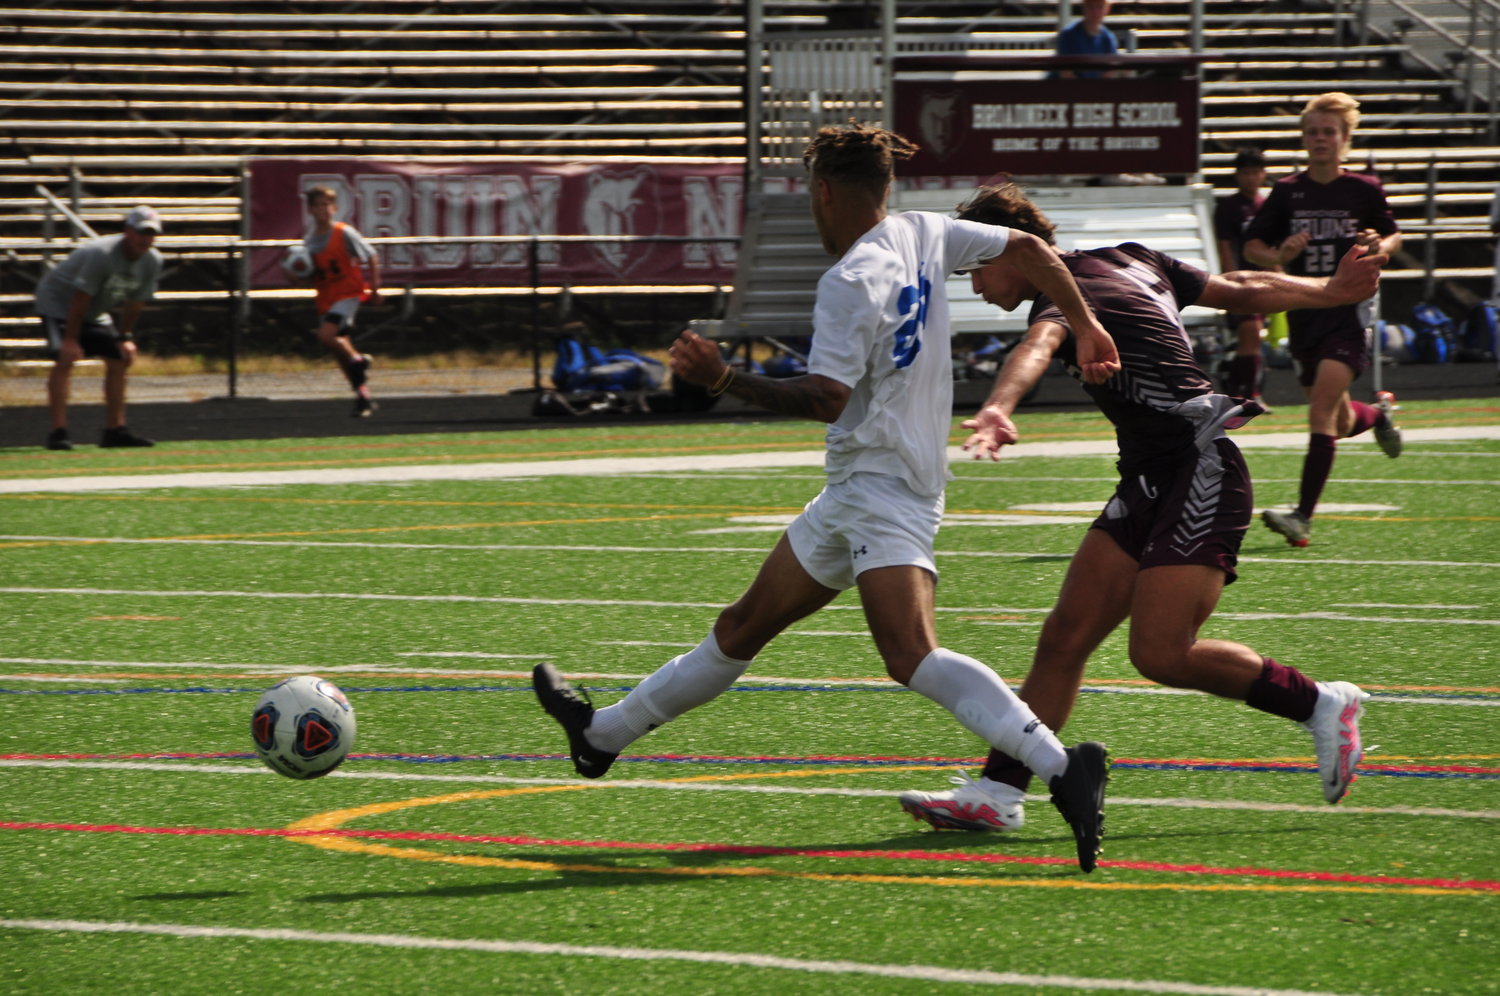 Riley Erbe (right) took a shot at the goal as a Calvert defender attempted a block. Erbe would score on this shot to extend Broadneck’s lead.